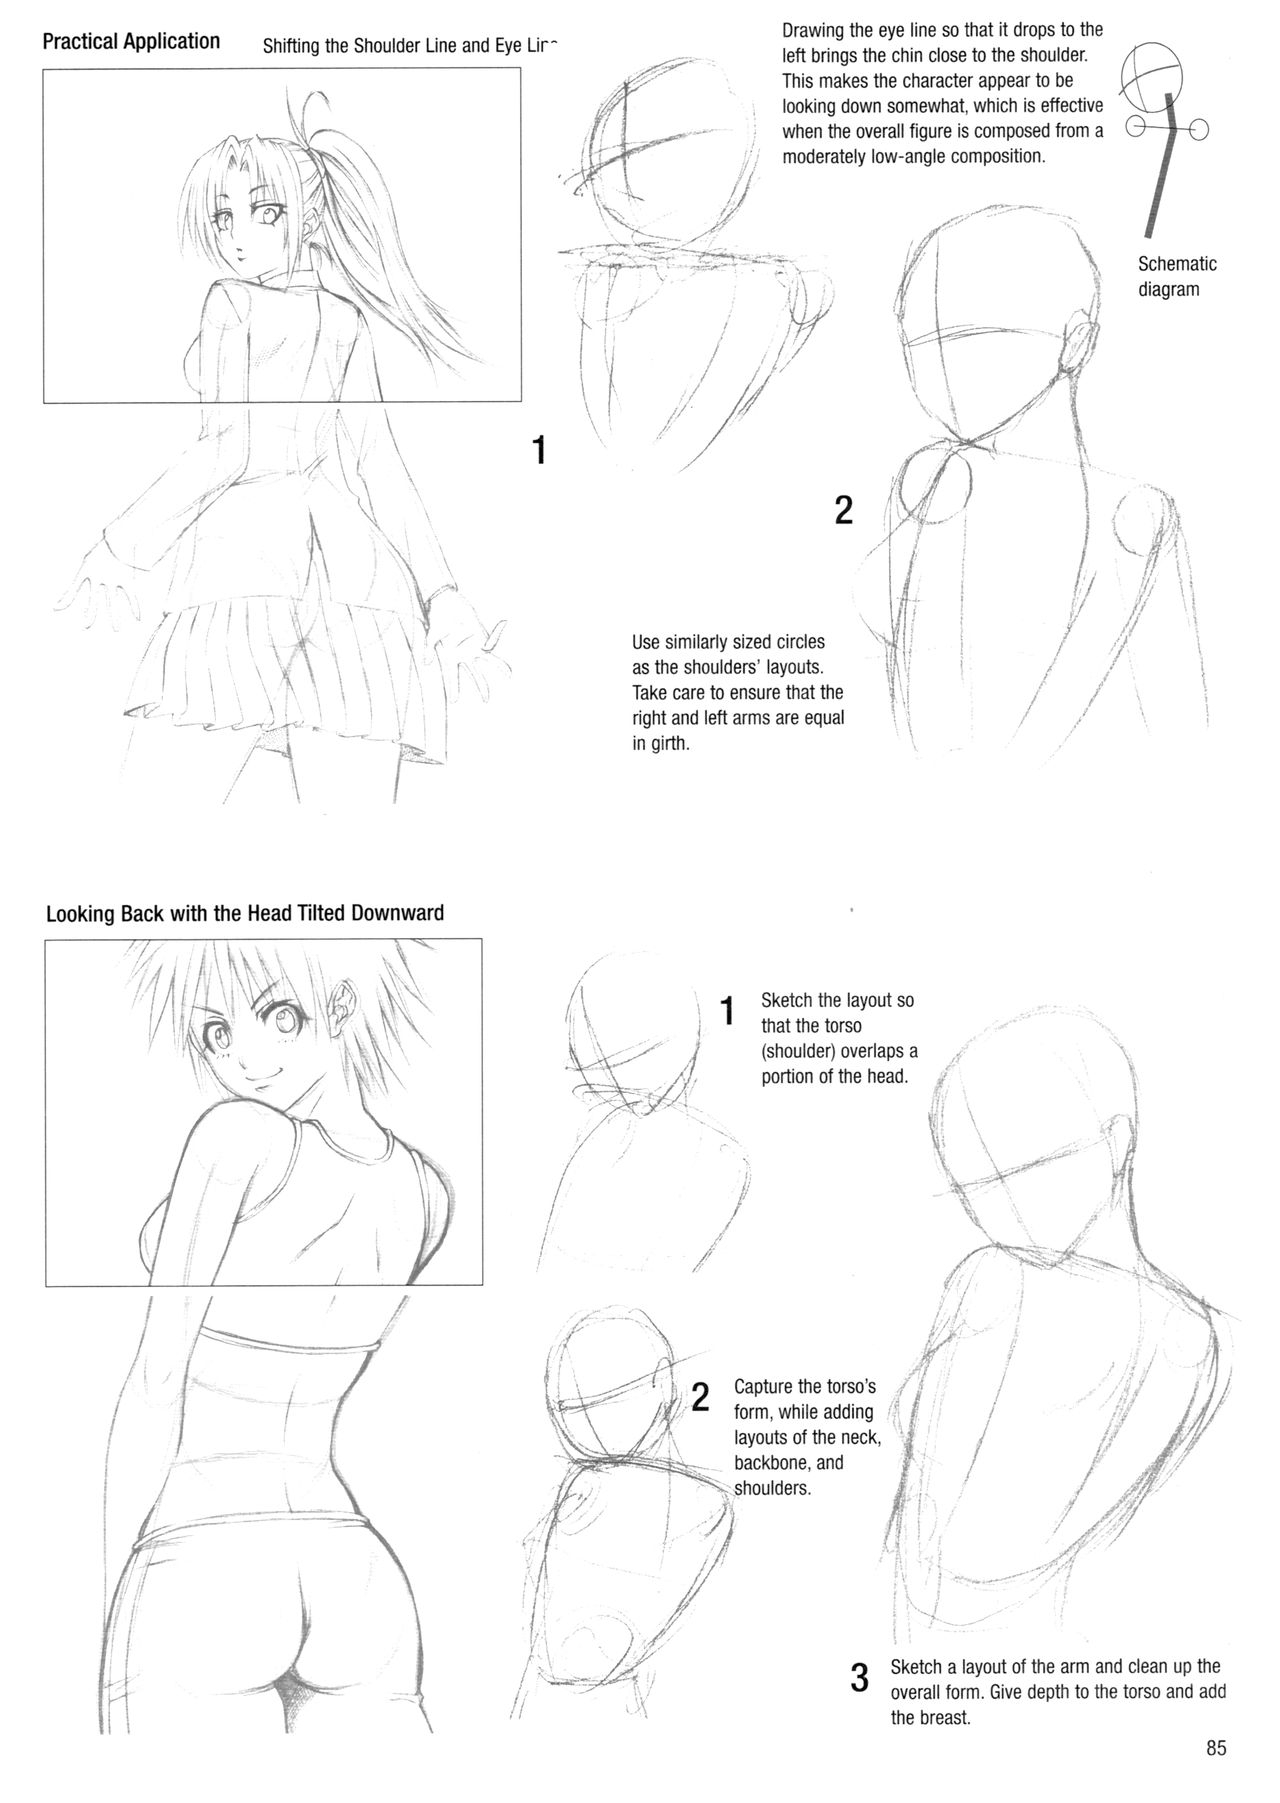 Sketching Manga-Style Vol. 3 - Unforgettable Characters 84